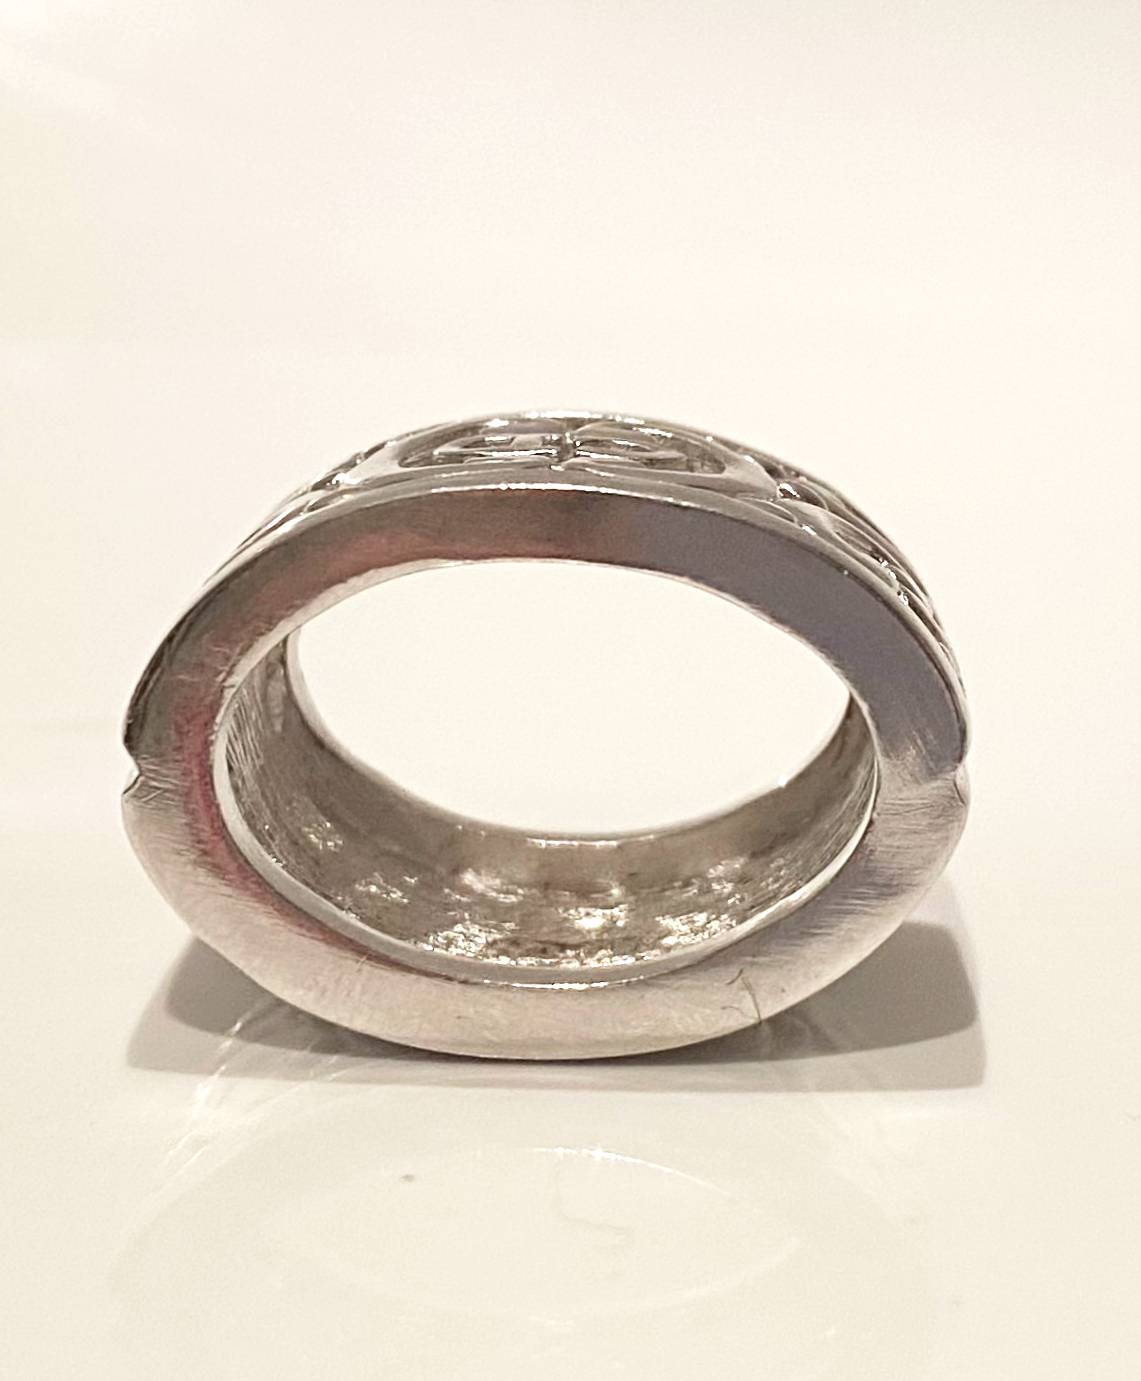 1980s Christian Dior Scarf Rhodium Plated Art Nouveau Design Ring - style - CHNGR